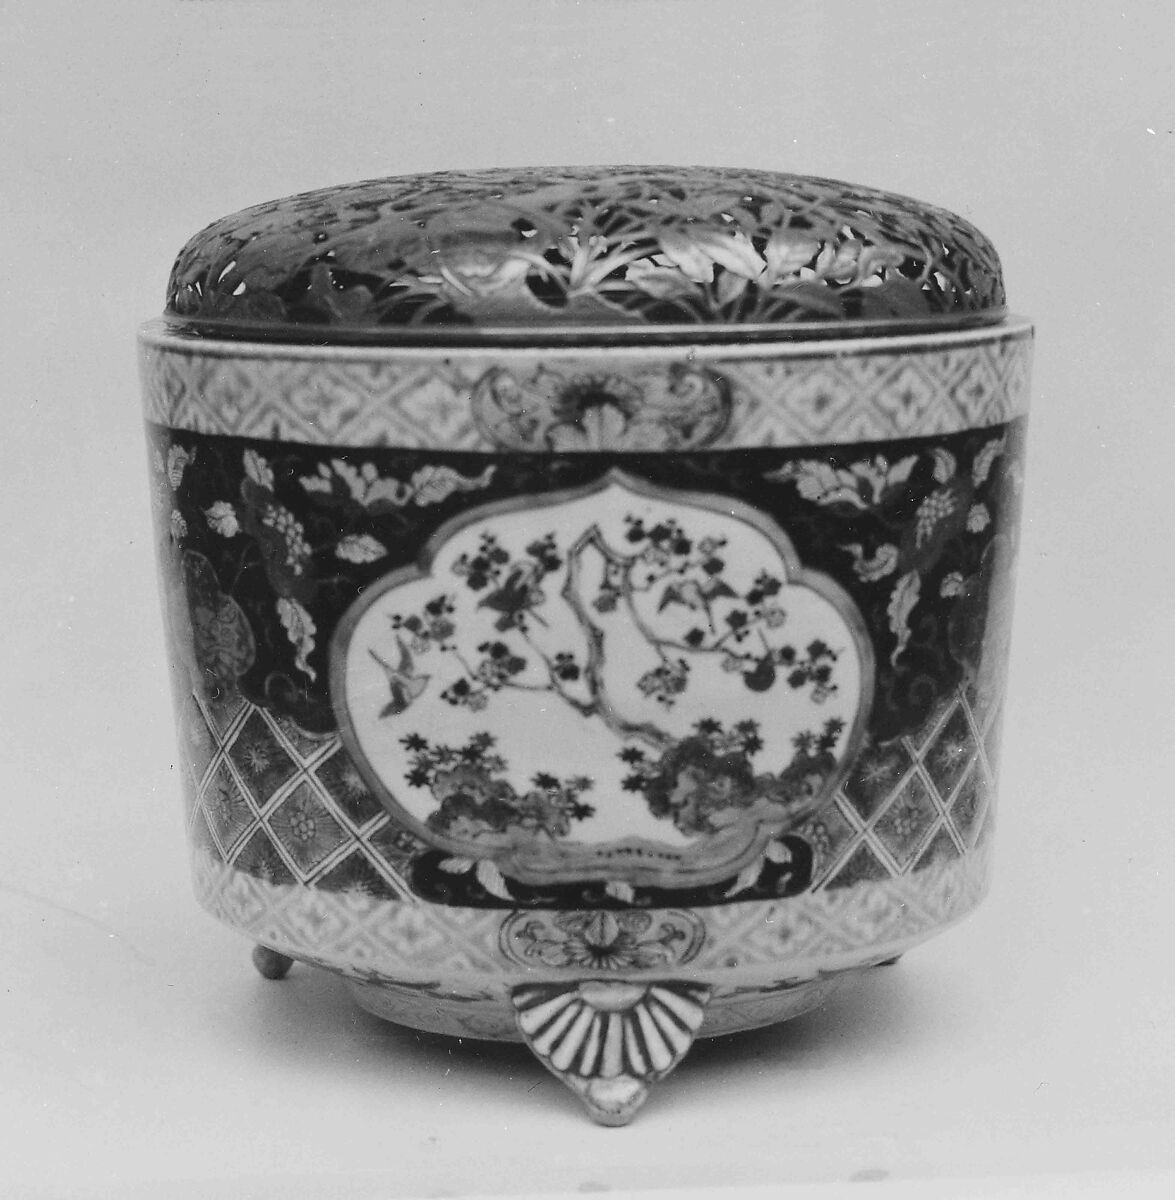 Censer with Silver Lid, Porcelain decorated with enamels (Arita ware, Imari type), Japan 